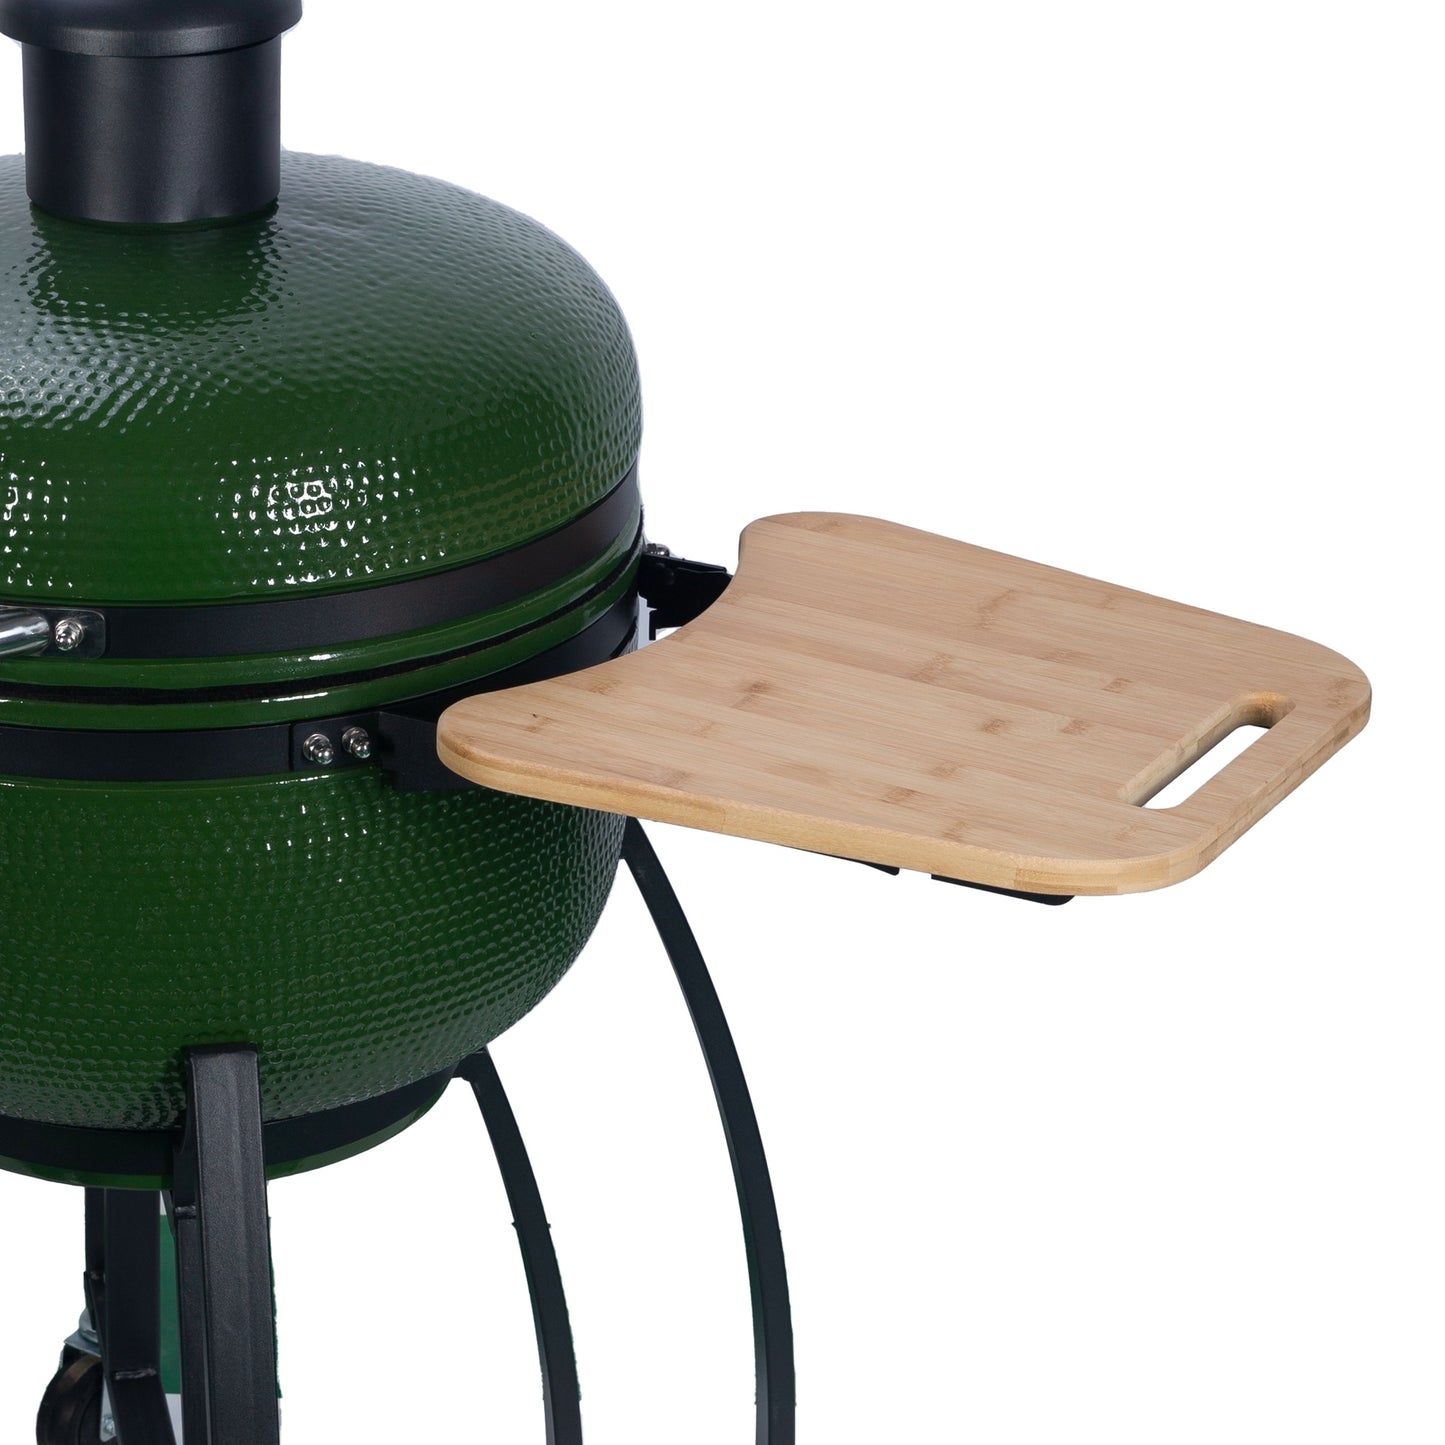 Ceramic Pellet Grill Outdoor LCD Automatic Smoked Roasted BBQ Pan ...